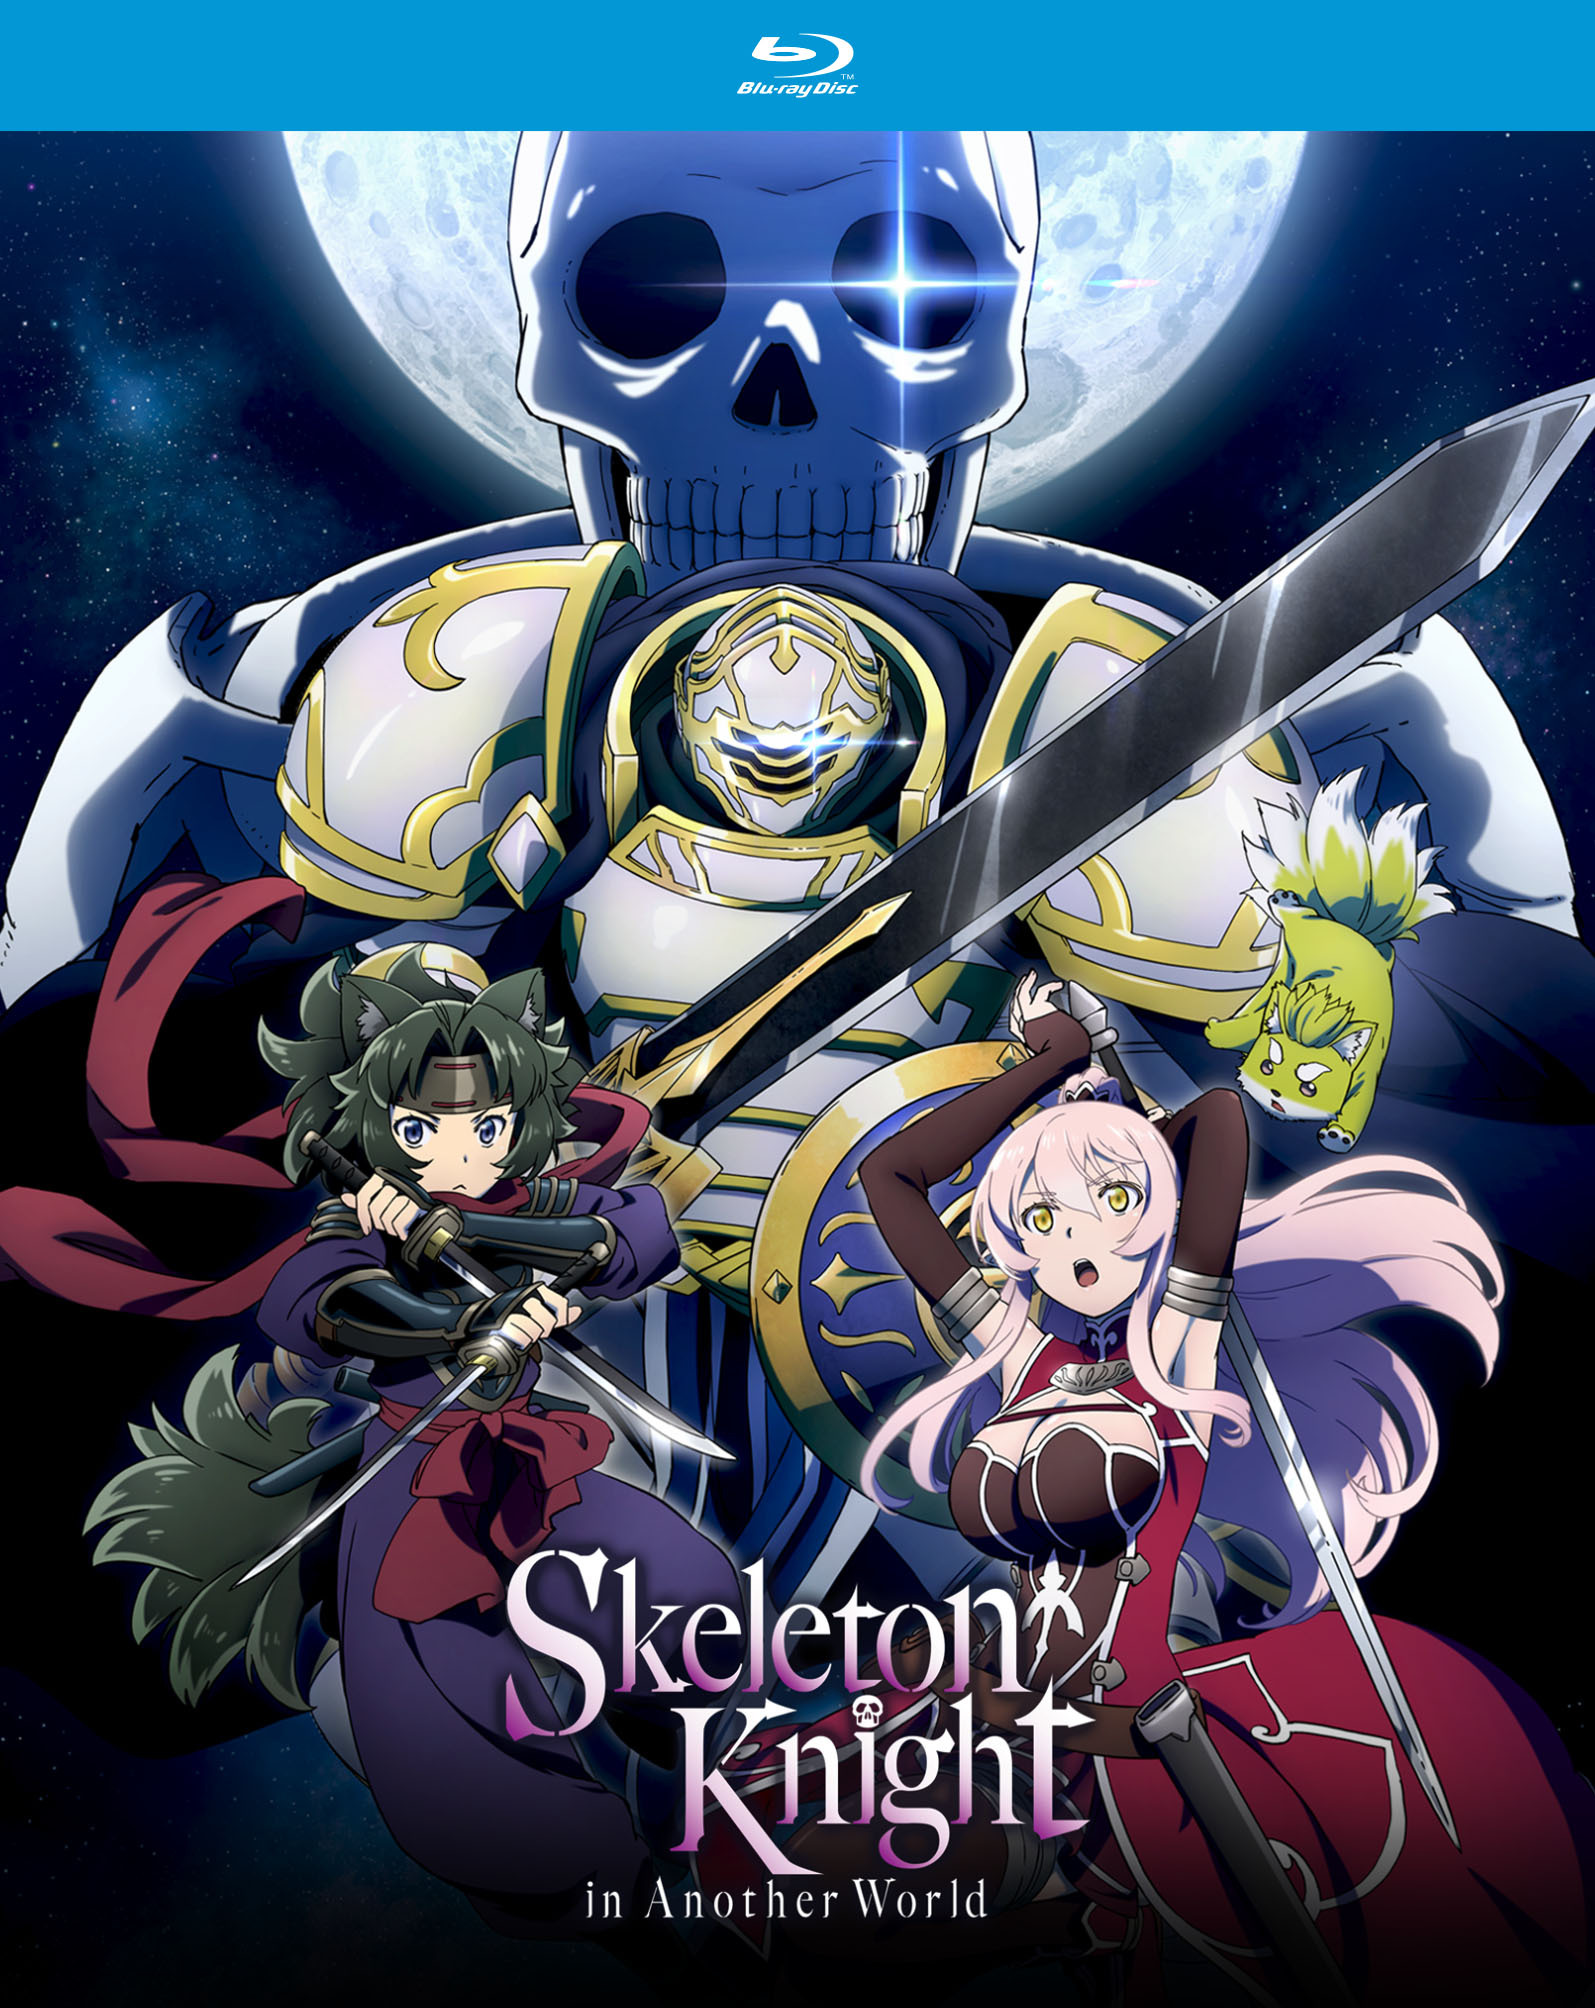 Skeleton Knight In Another World: The Complete Season - Blu-ray [ 2015 ]